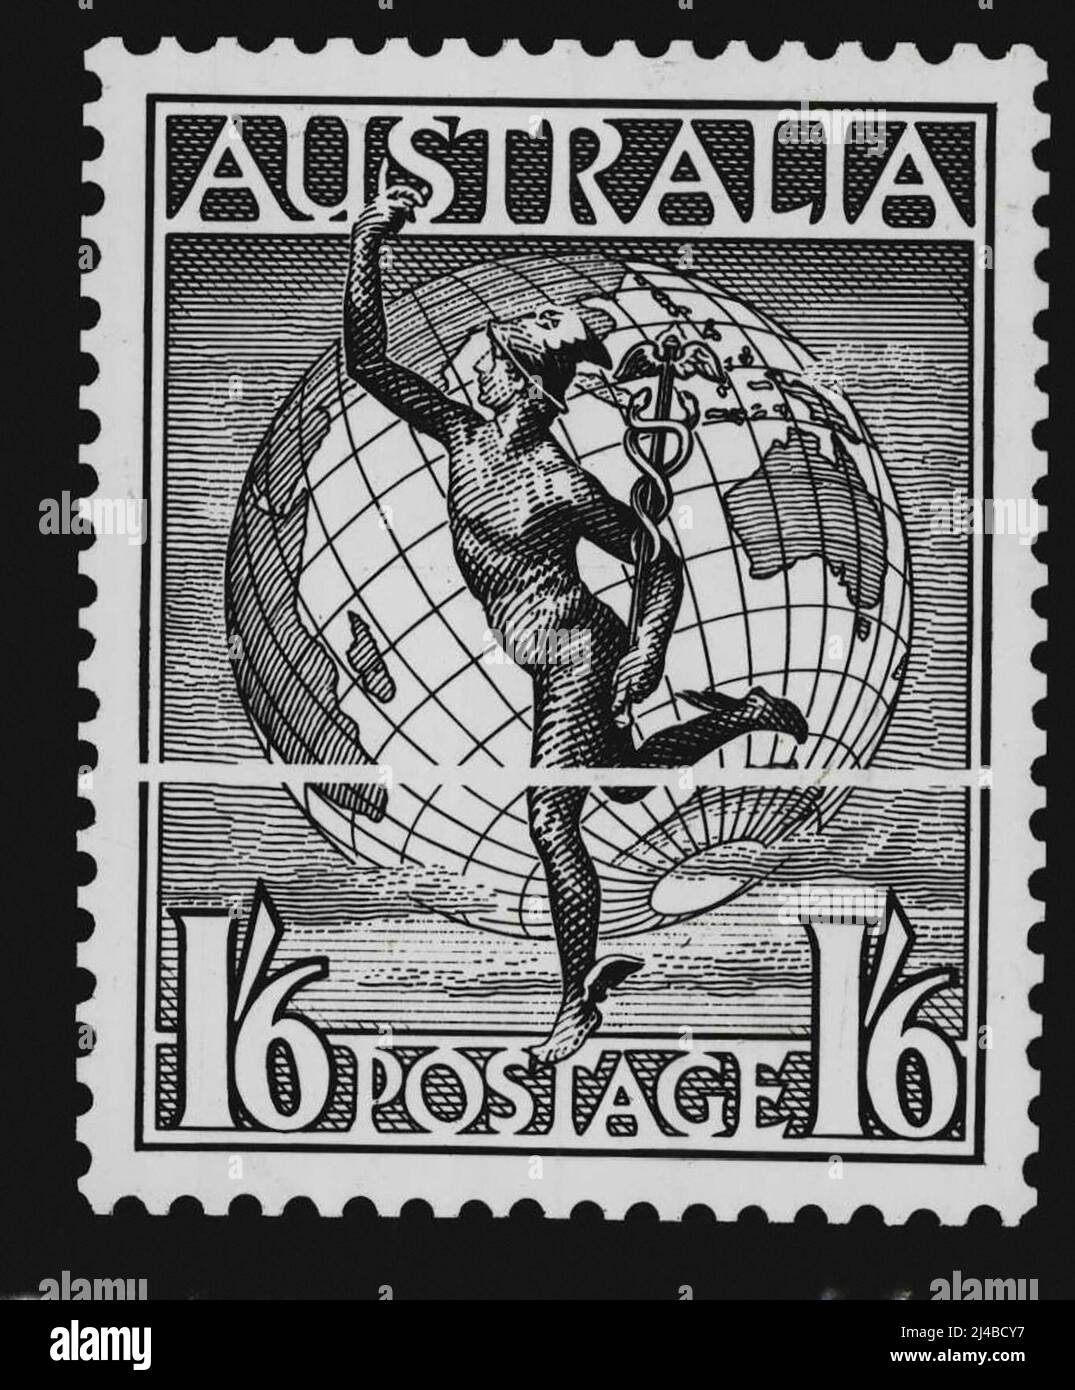 NEW Stamp: The figure of Mercury is set prominently in the design of the new 1/6 stamp which will be on sale at post offices in the commonwealth on September 1. The principal motif will be one glove in stead of two hemispheres as at present. August 9, 1949. Stock Photo